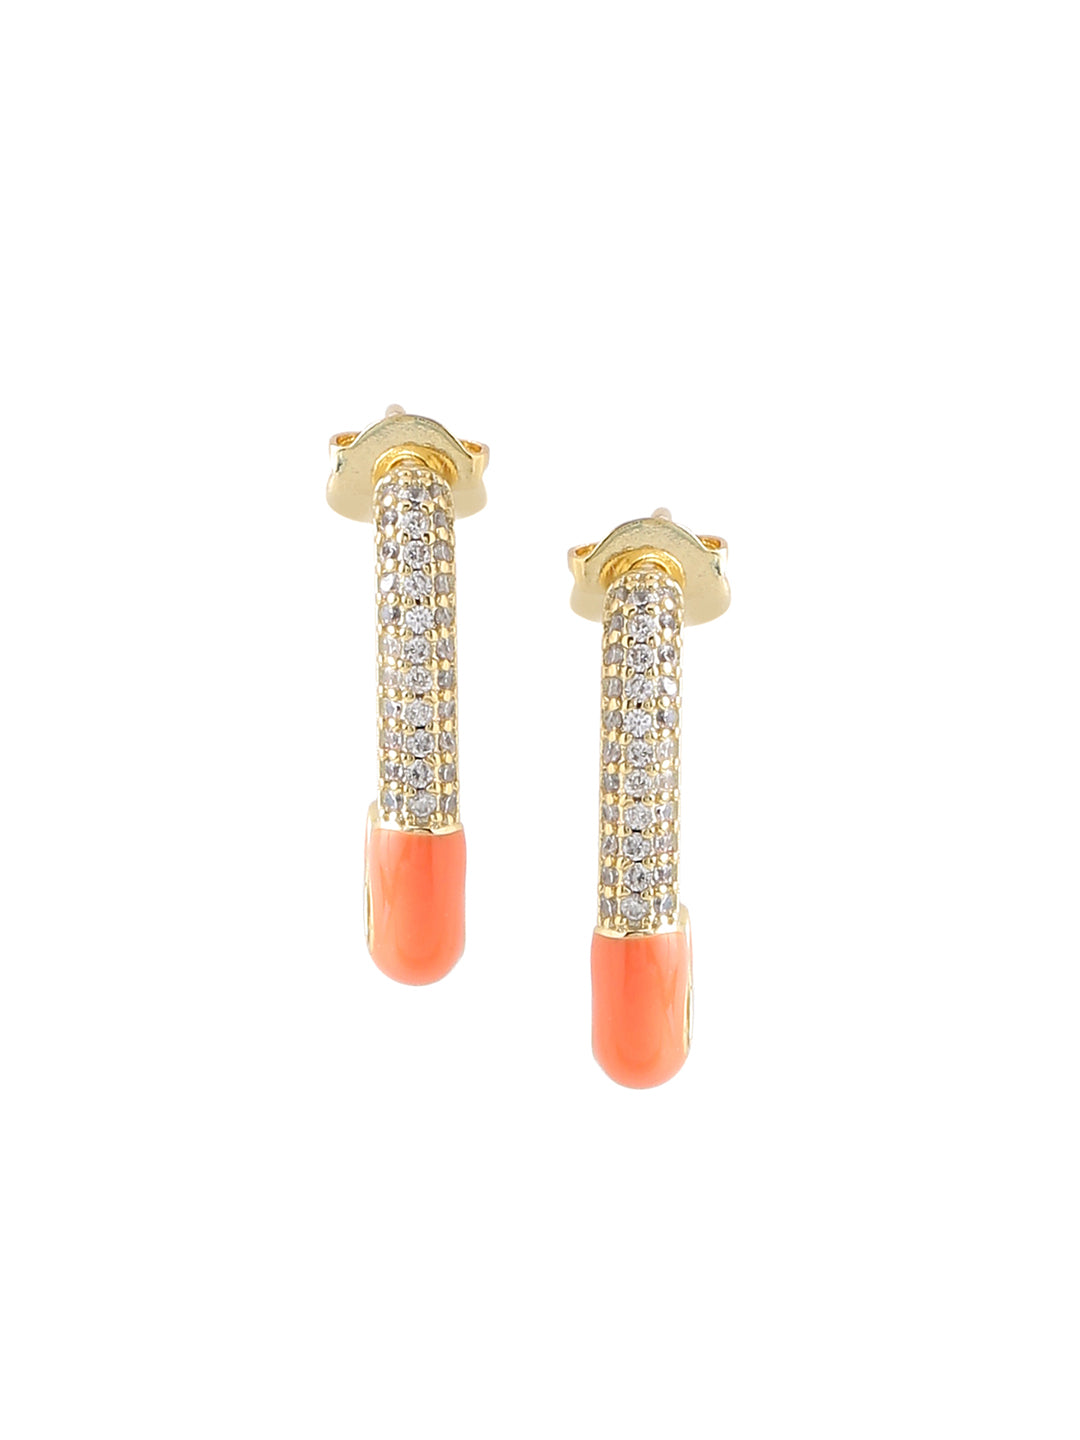 Cotton Candy Safety Pin Earrings - Orange